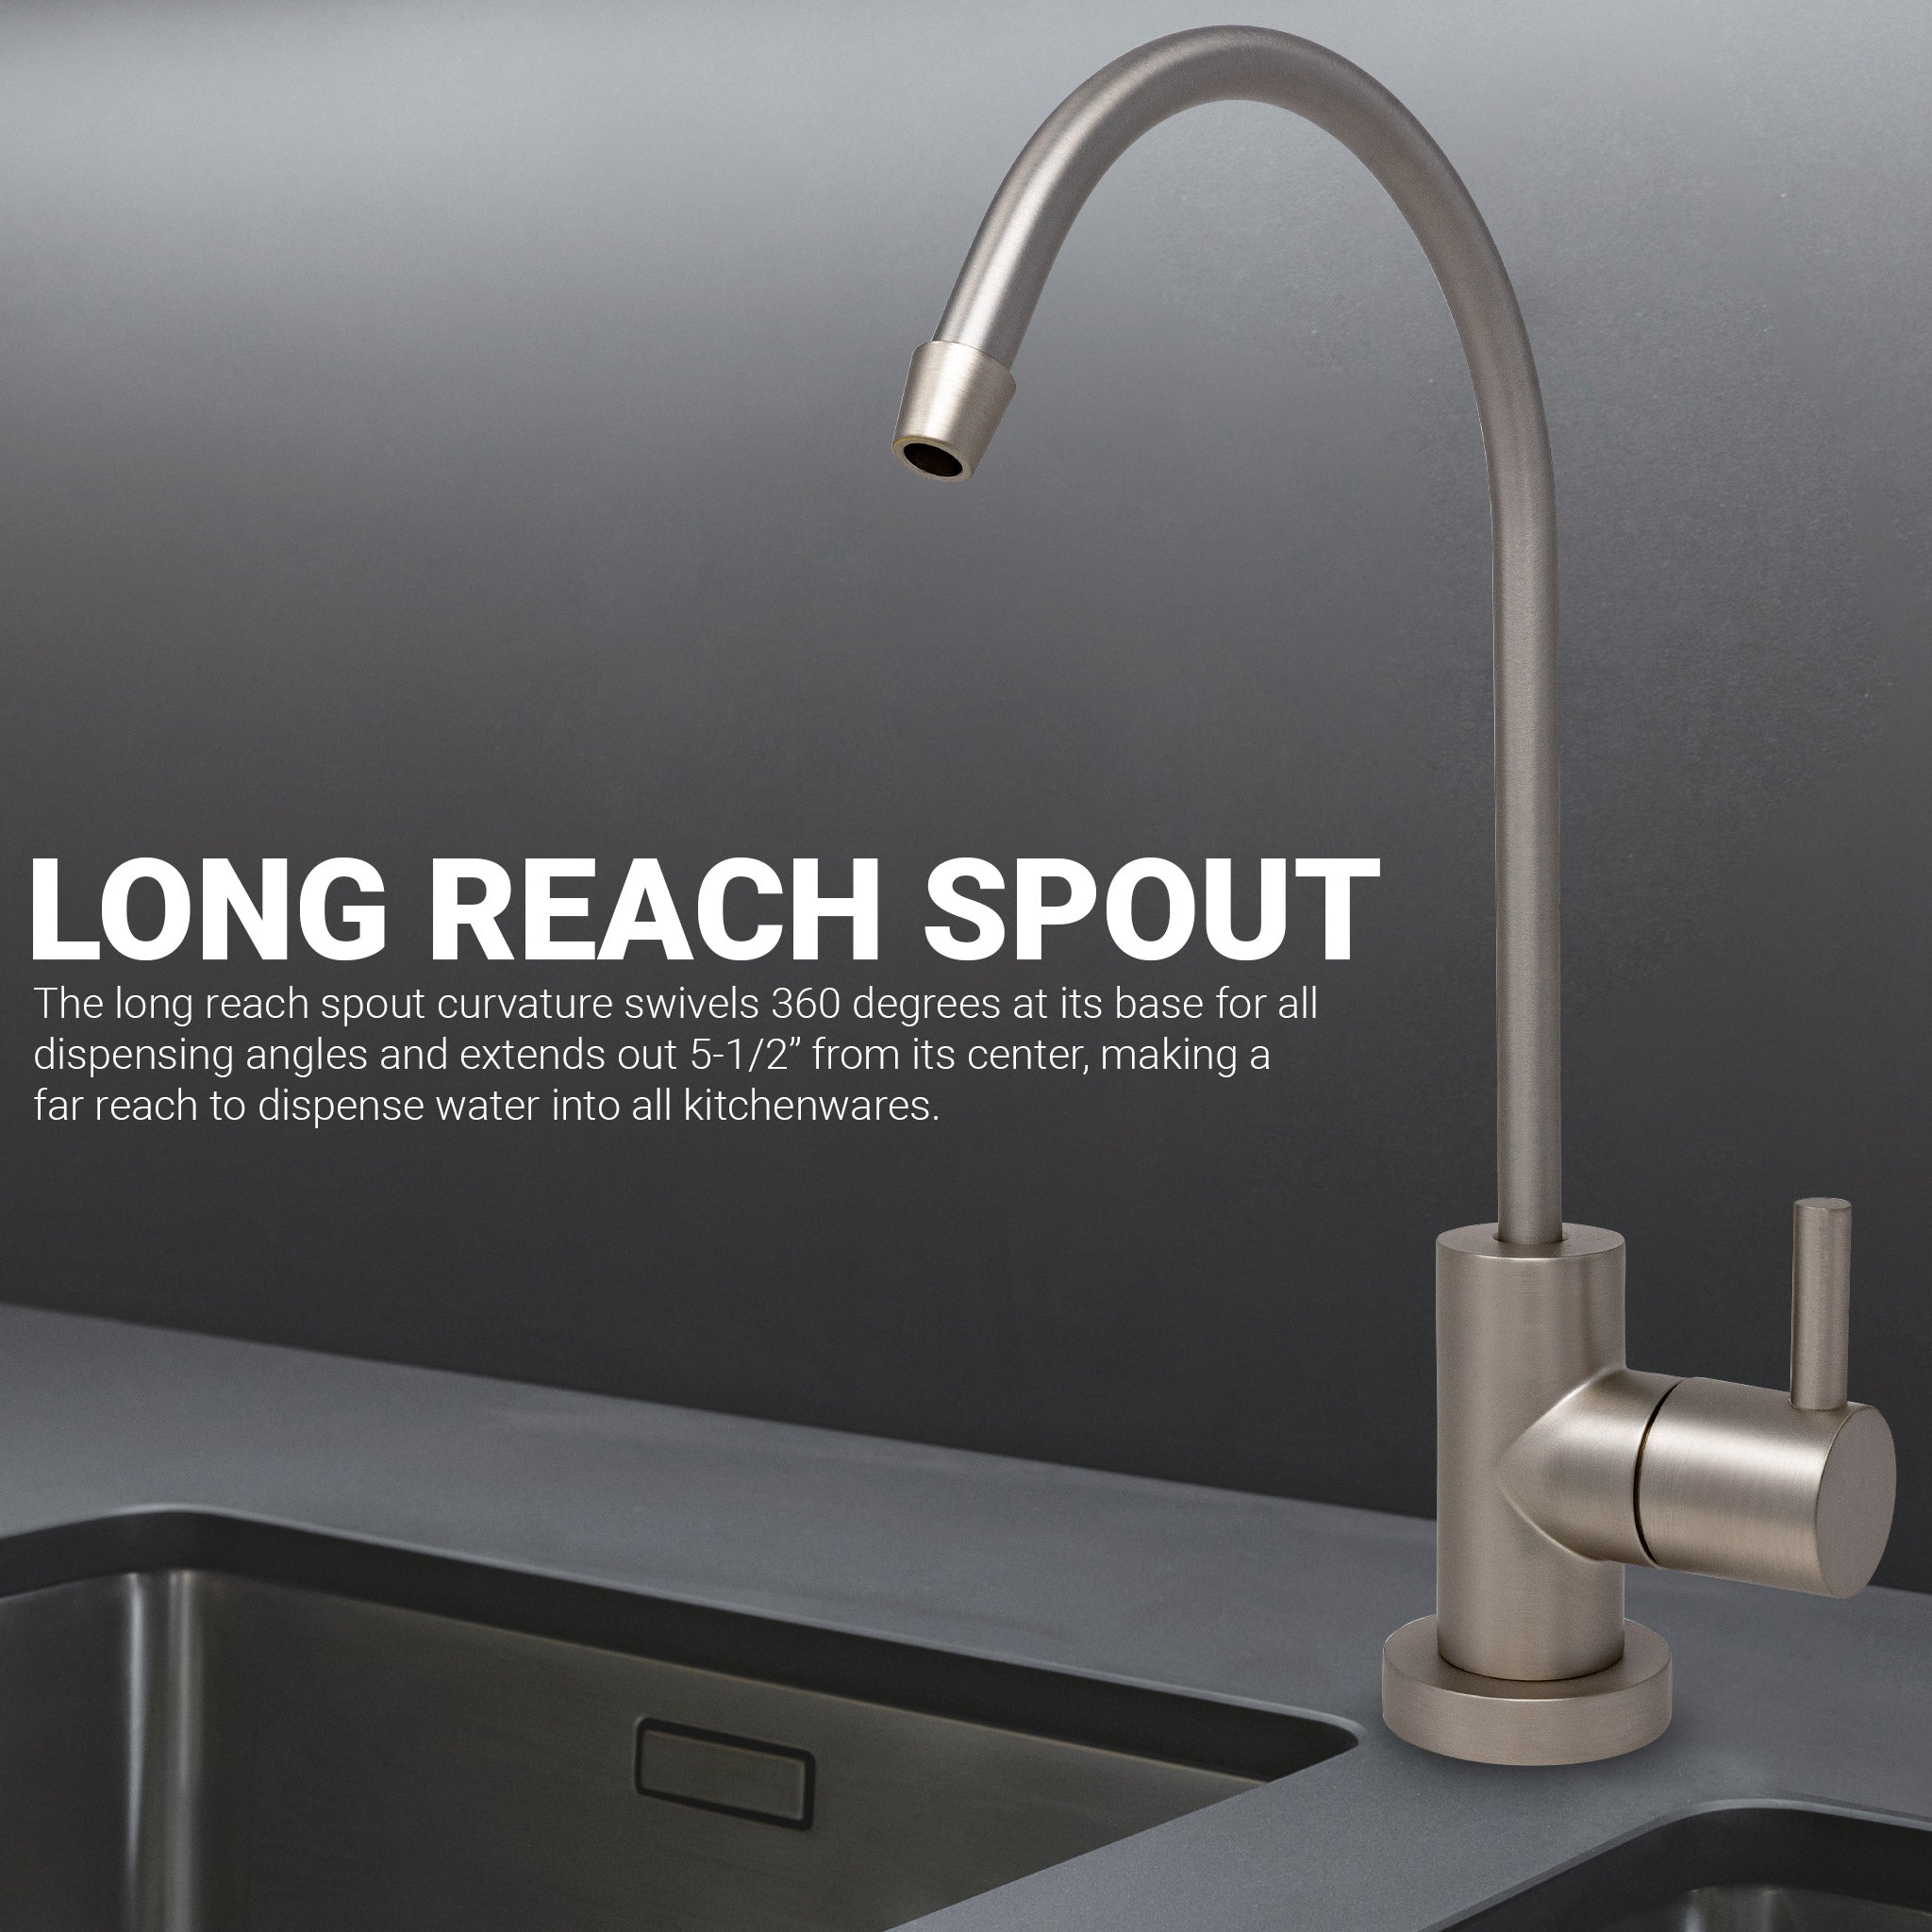 Water Filtration Faucet Satin Nickel Euro Style Reverse Osmosis Non Air Gap. Certified by NSF.